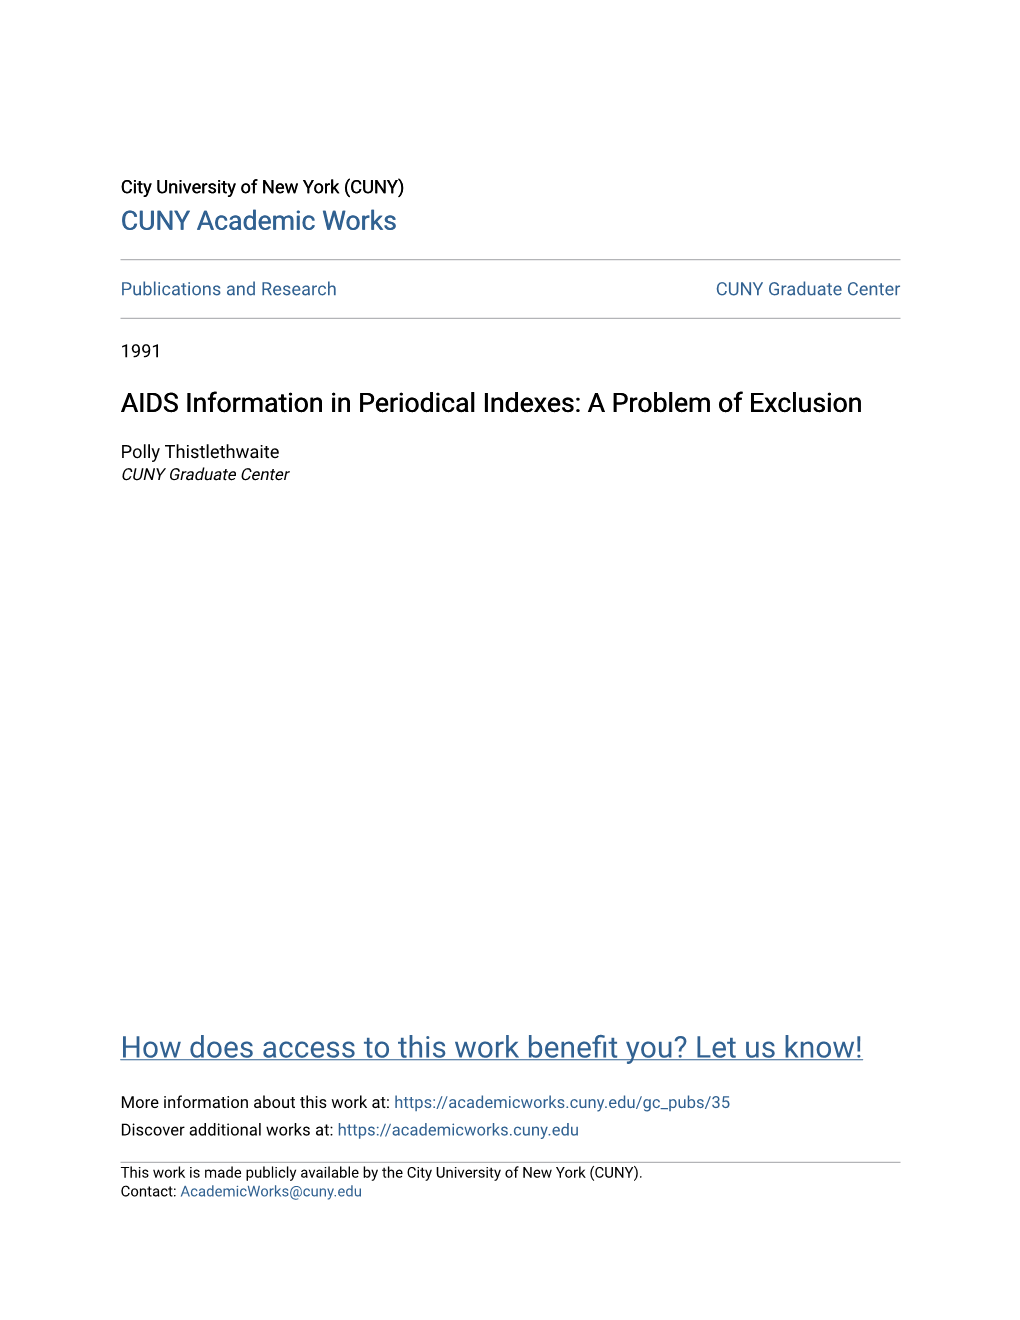 AIDS Information in Periodical Indexes: a Problem of Exclusion